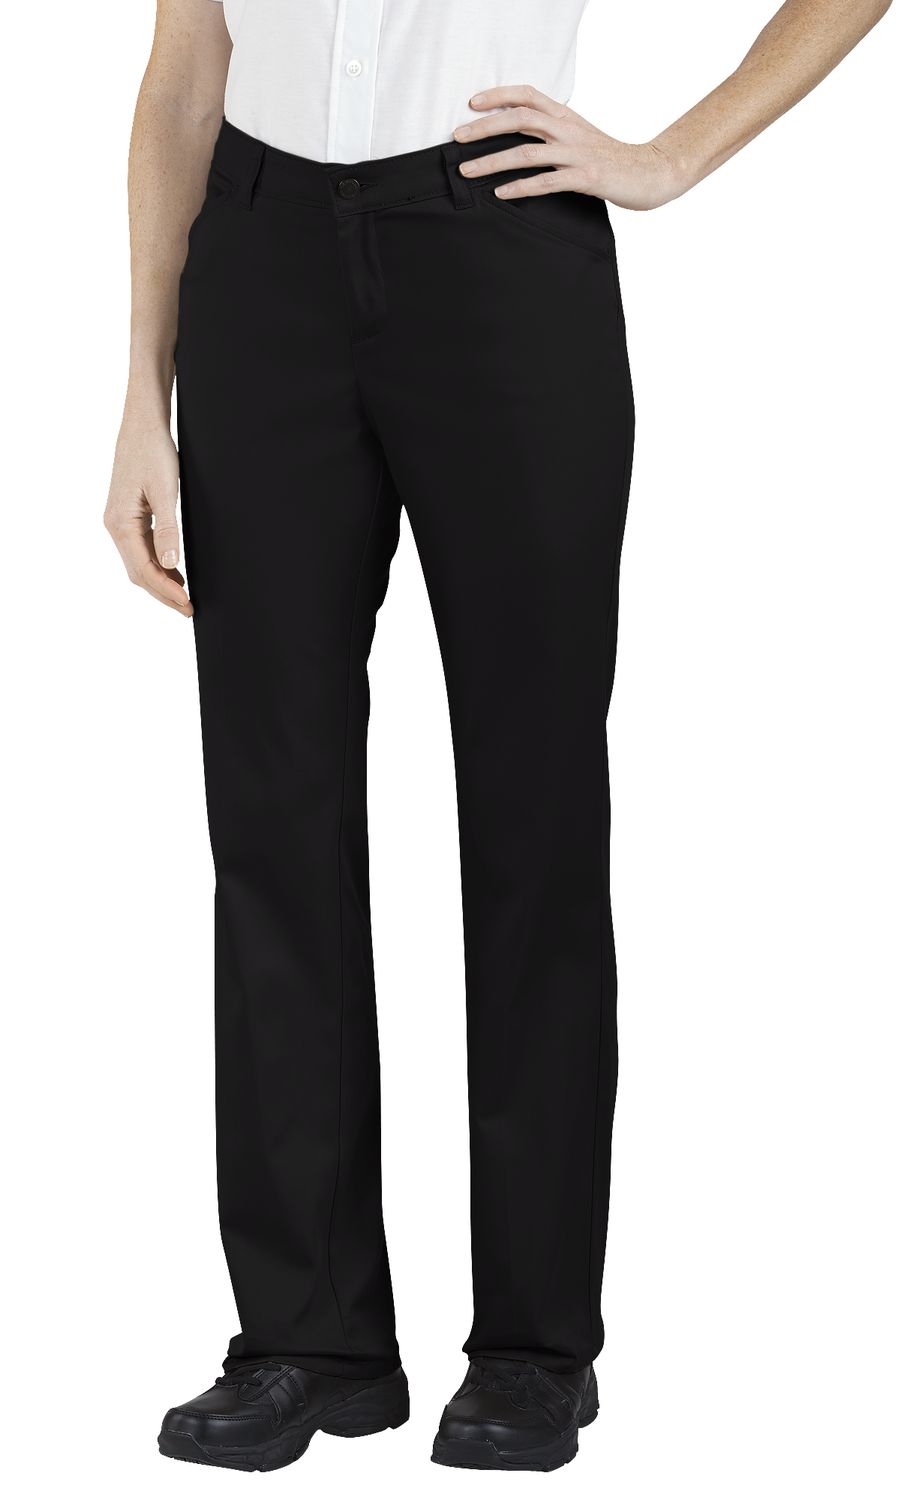 Genuine Dickies Women’s Relaxed Fit Stretch Twill Pant | Walmart Canada